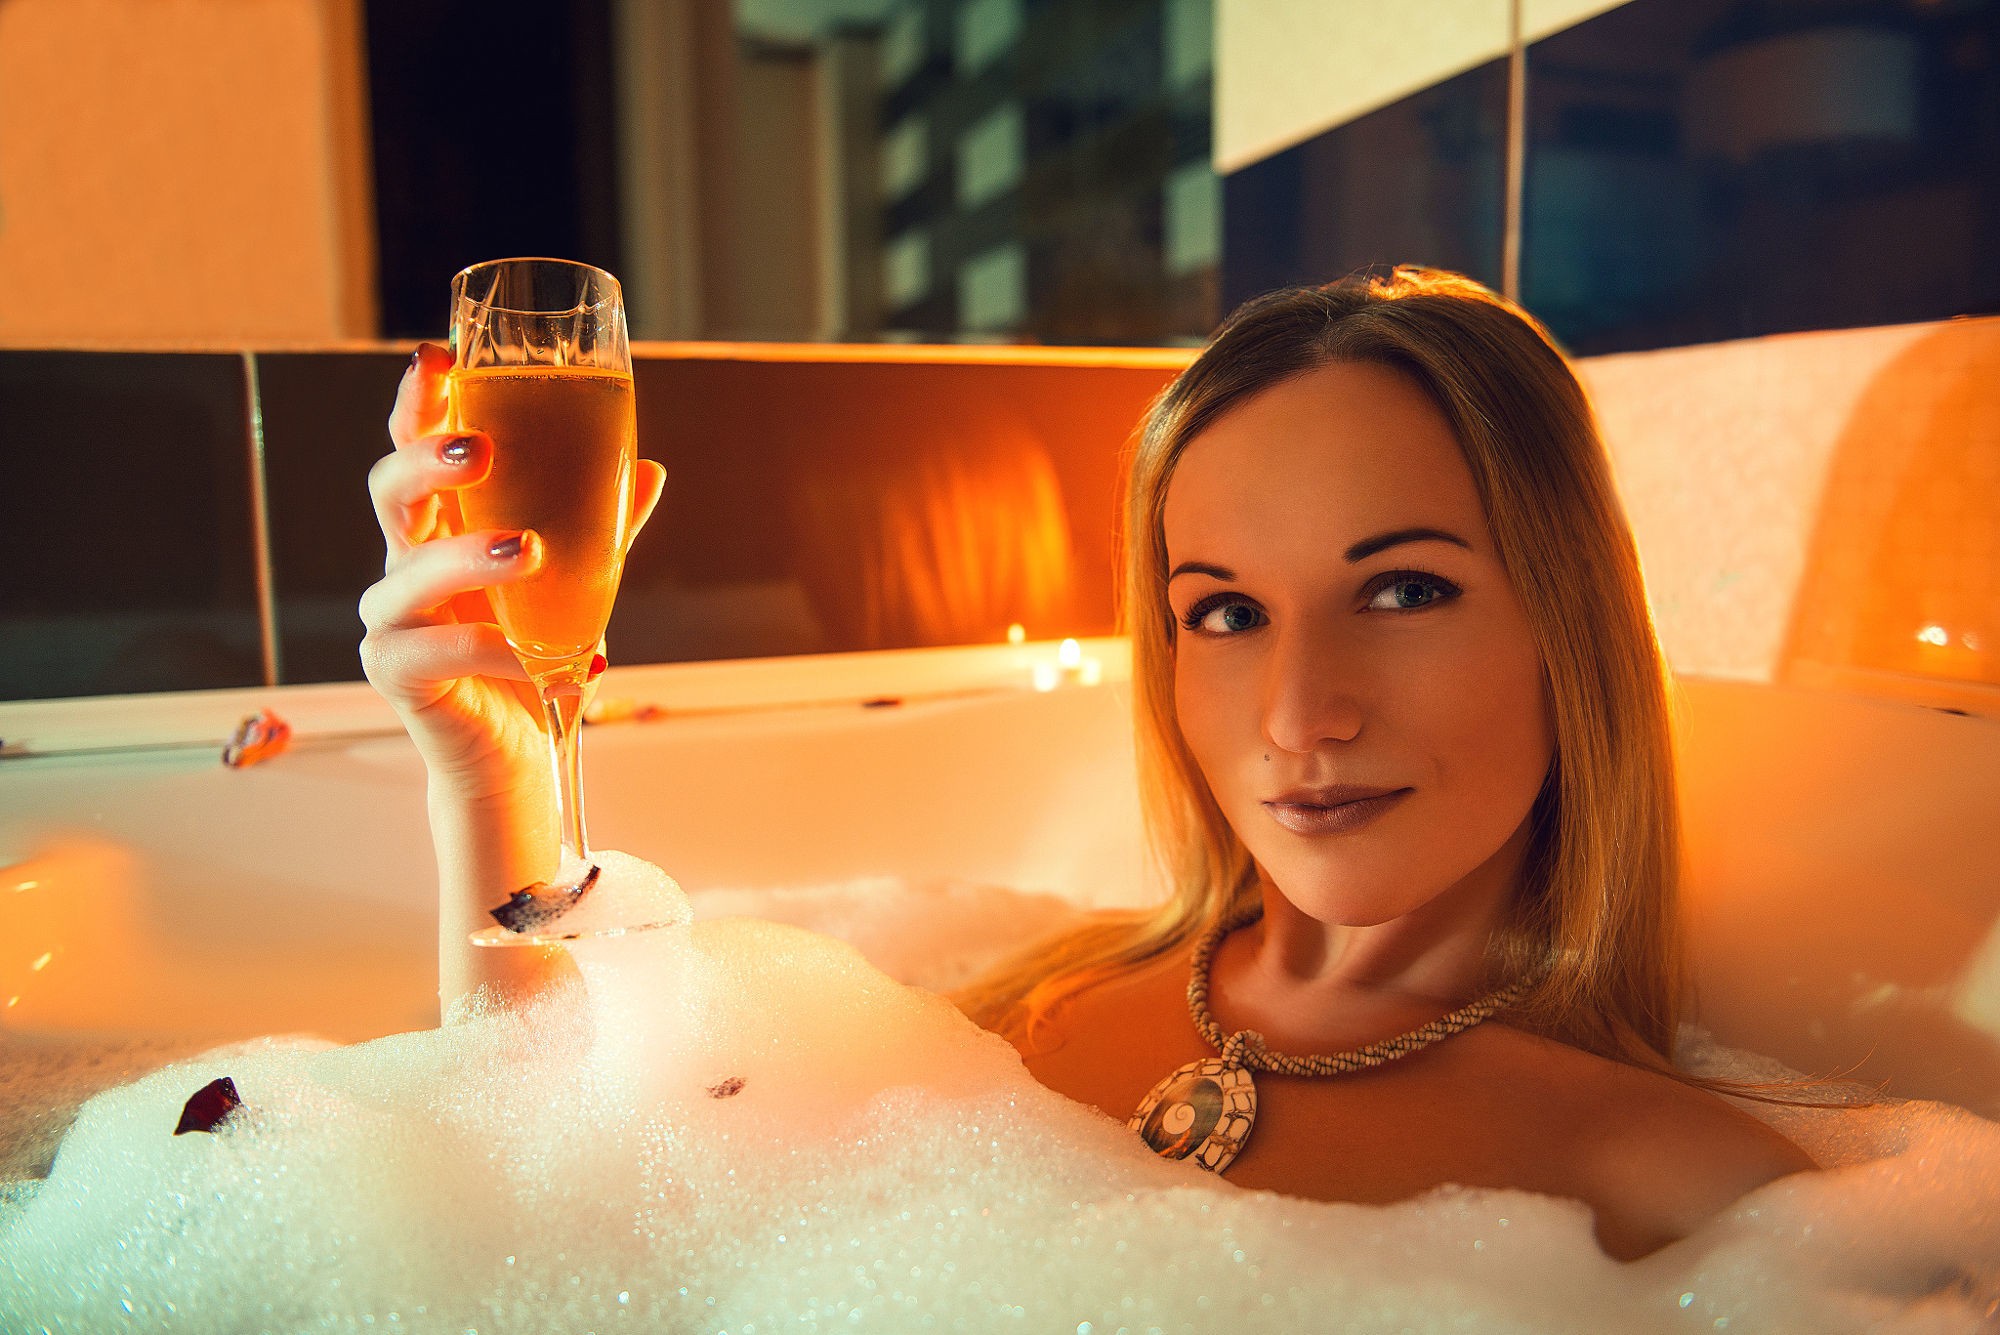 People 2000x1335 bathtub women model drinking glass foam makeup face in water in bathtub looking at viewer women indoors indoors painted nails necklace